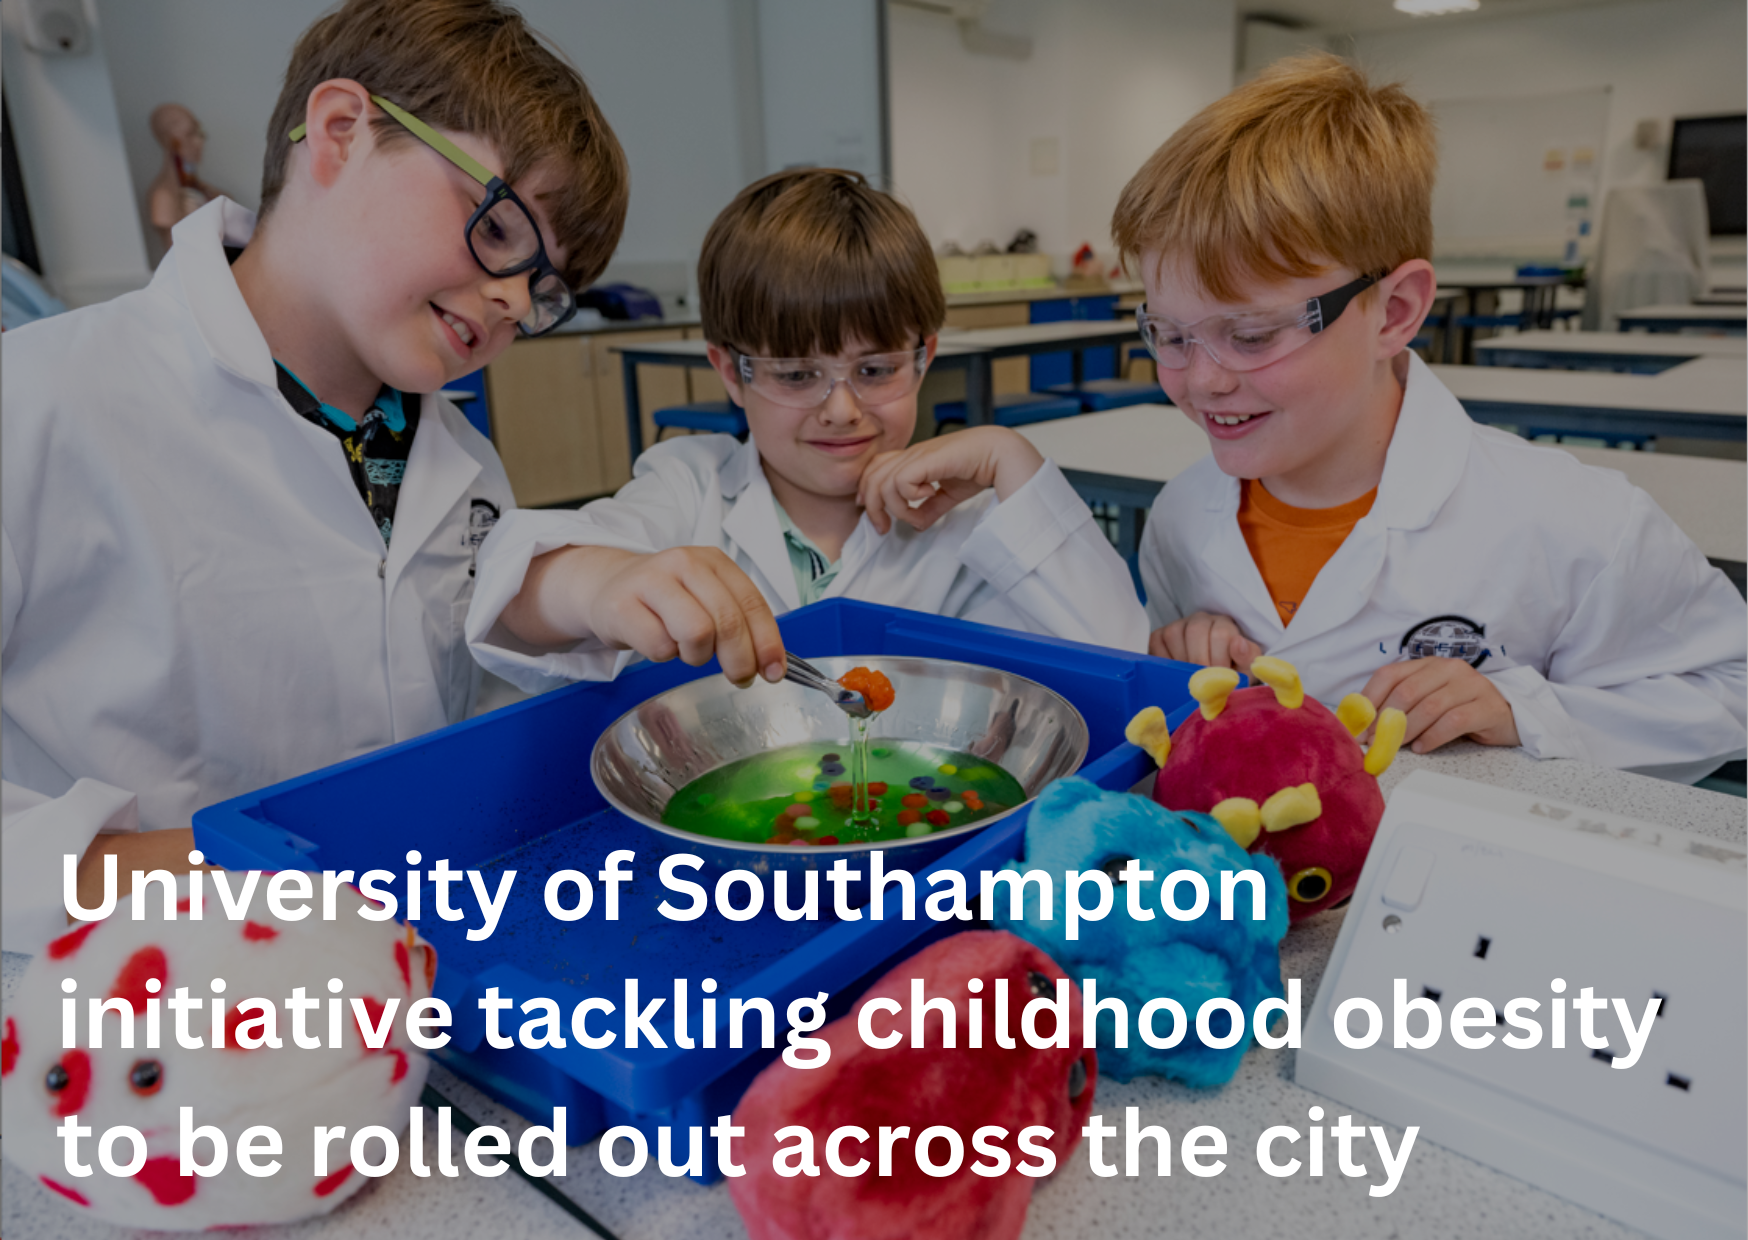 University of Southampton initiative tackling childhood obesity to be rolled out across the city